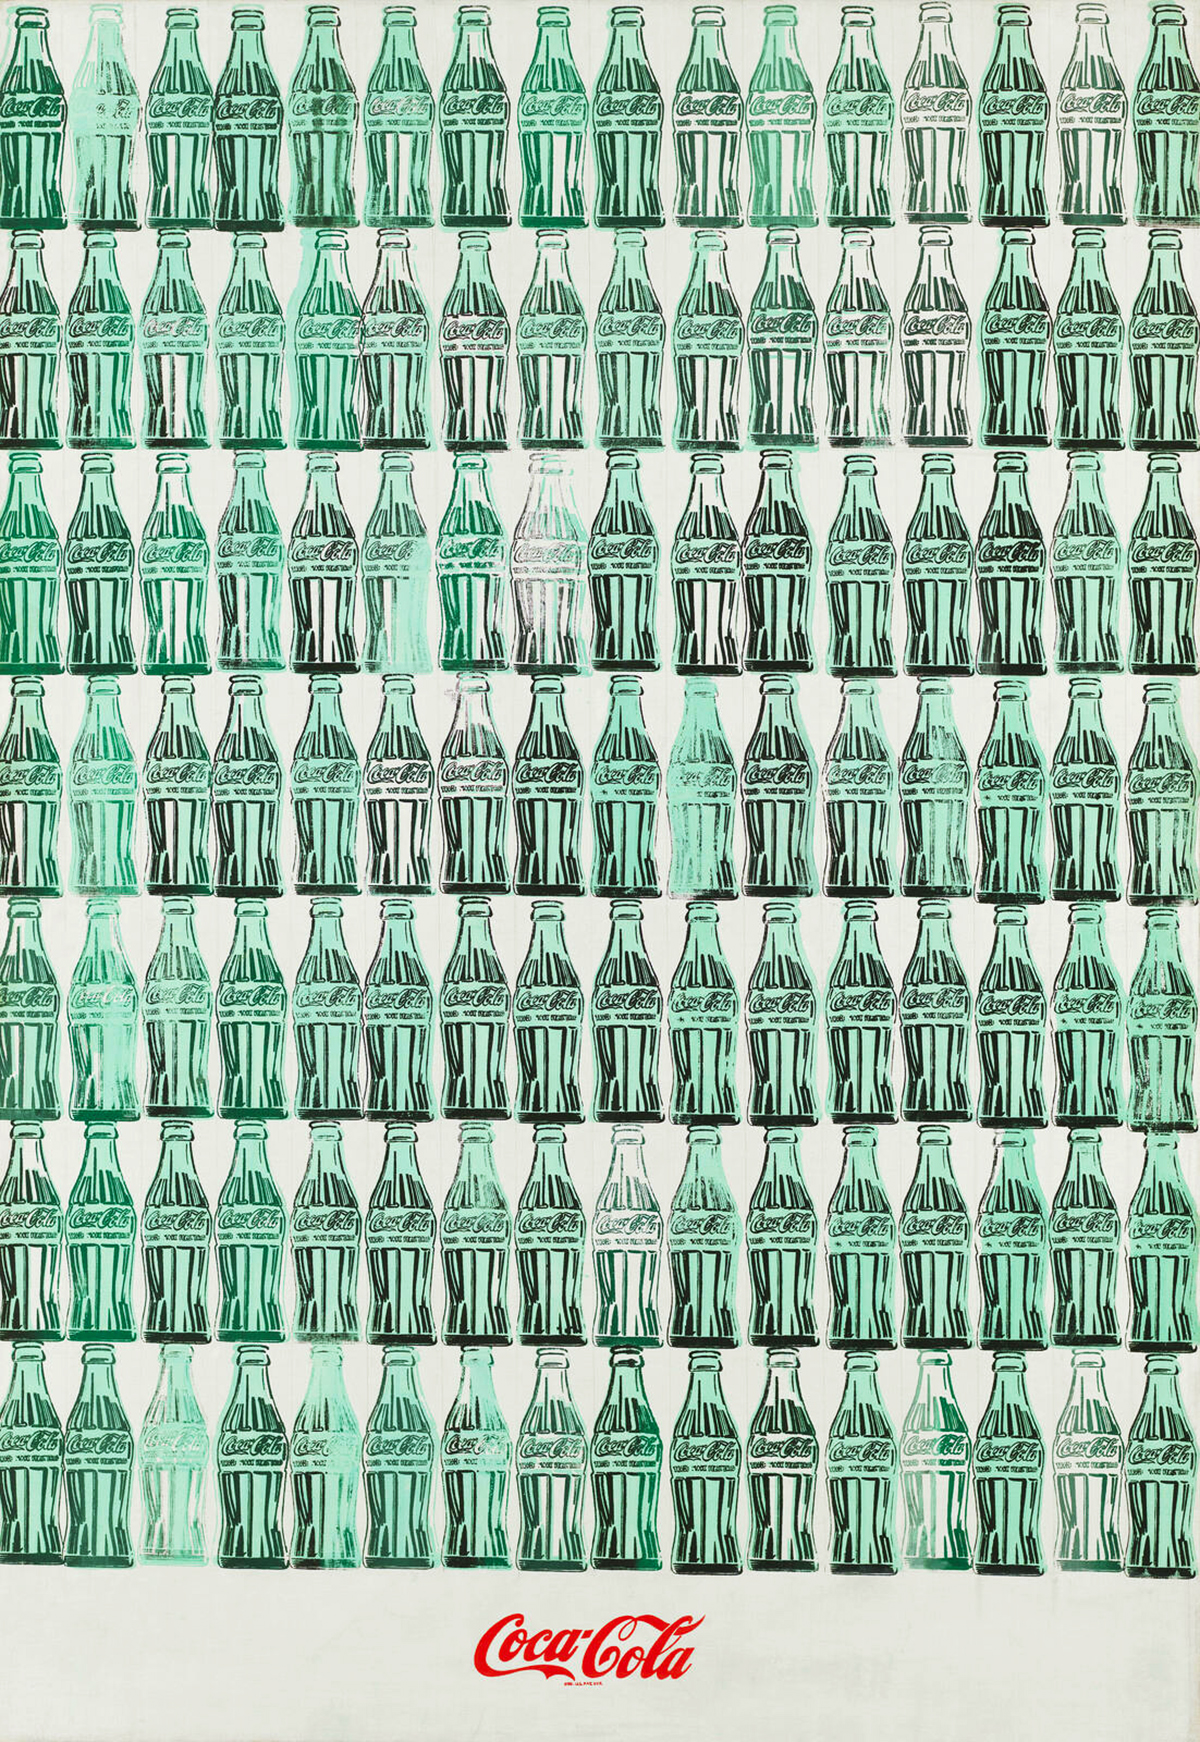 Artwork 'Green Coca-Cola Bottles' by Andy Warhol. A repetitive pattern of Coca-Cola bottles in greenish hues against a white background, showcasing Warhol's signature pop art style. The familiar Coca-Cola logo is placed at the bottom in red.